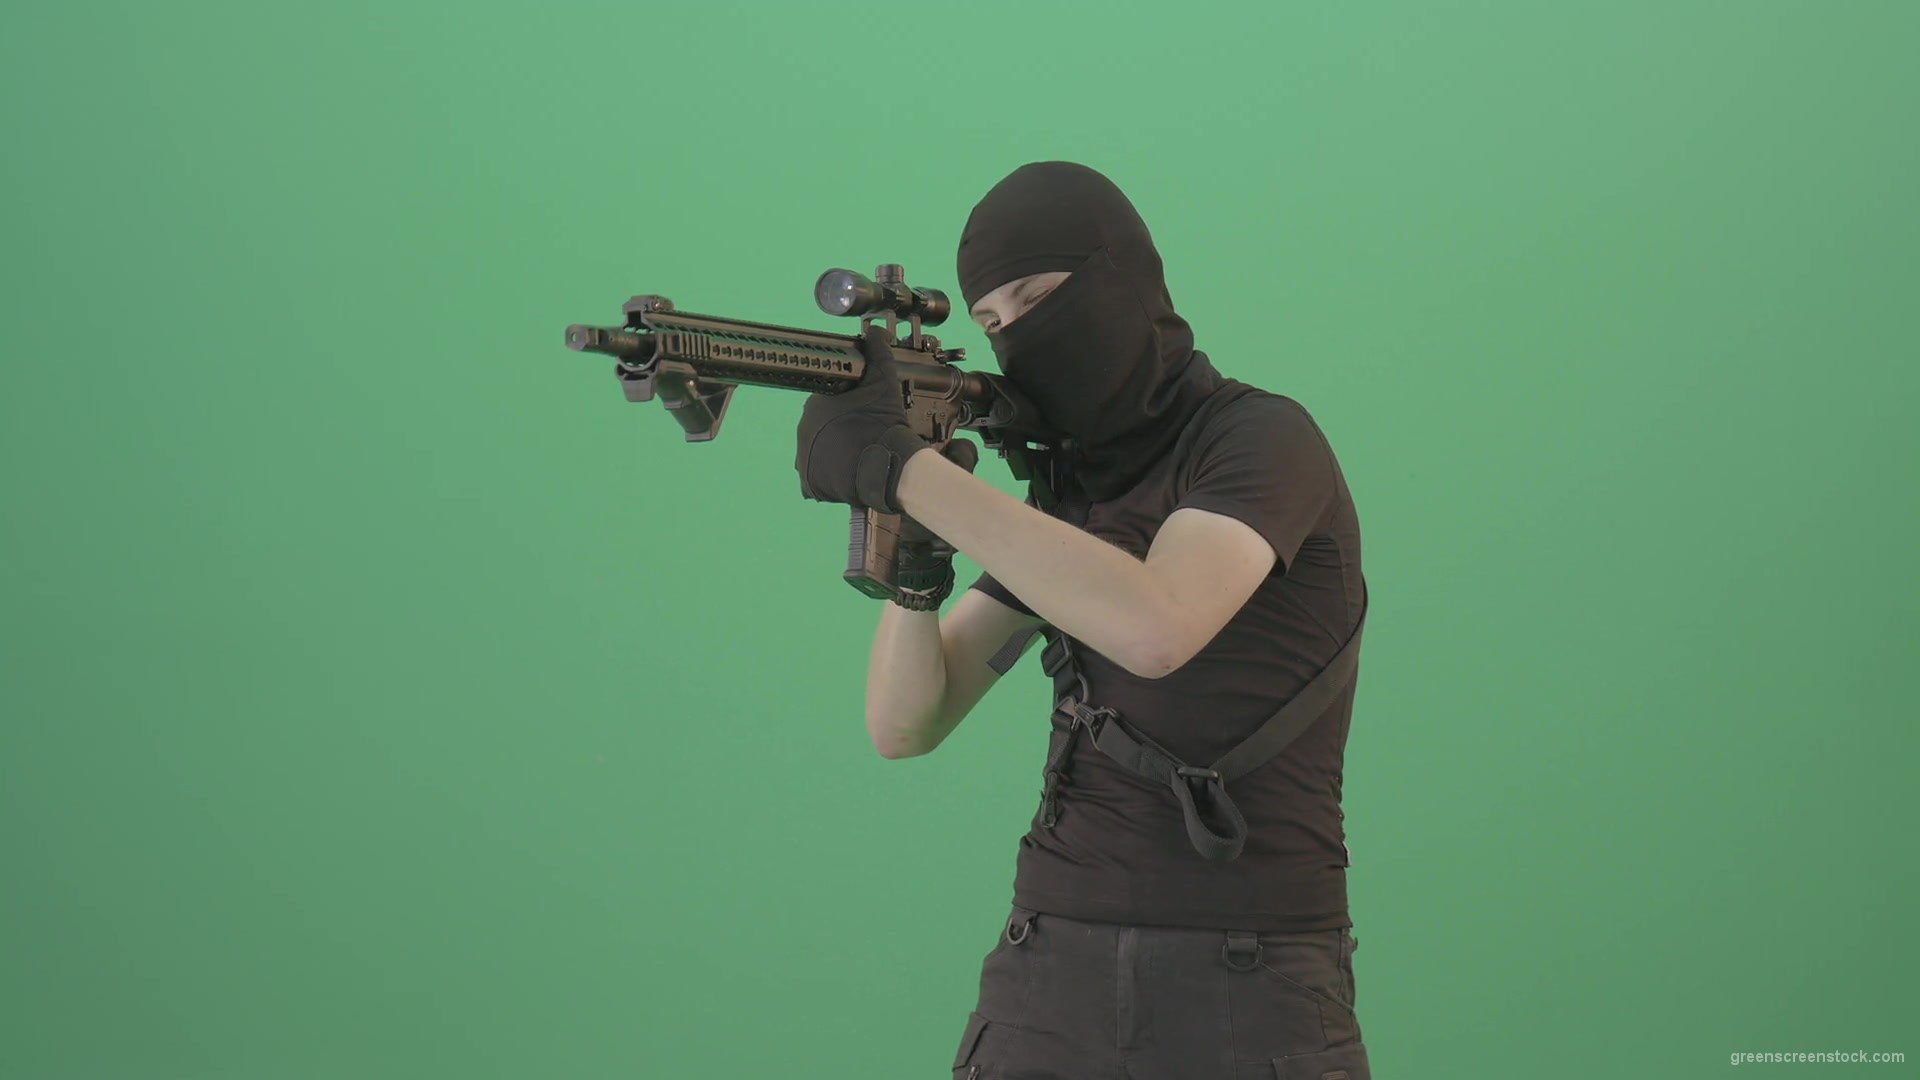 Soldier-in-black-mask-shooting-enemies-with-military-gun-on-green-screen-4K-Video-Footage-1920_009 Green Screen Stock